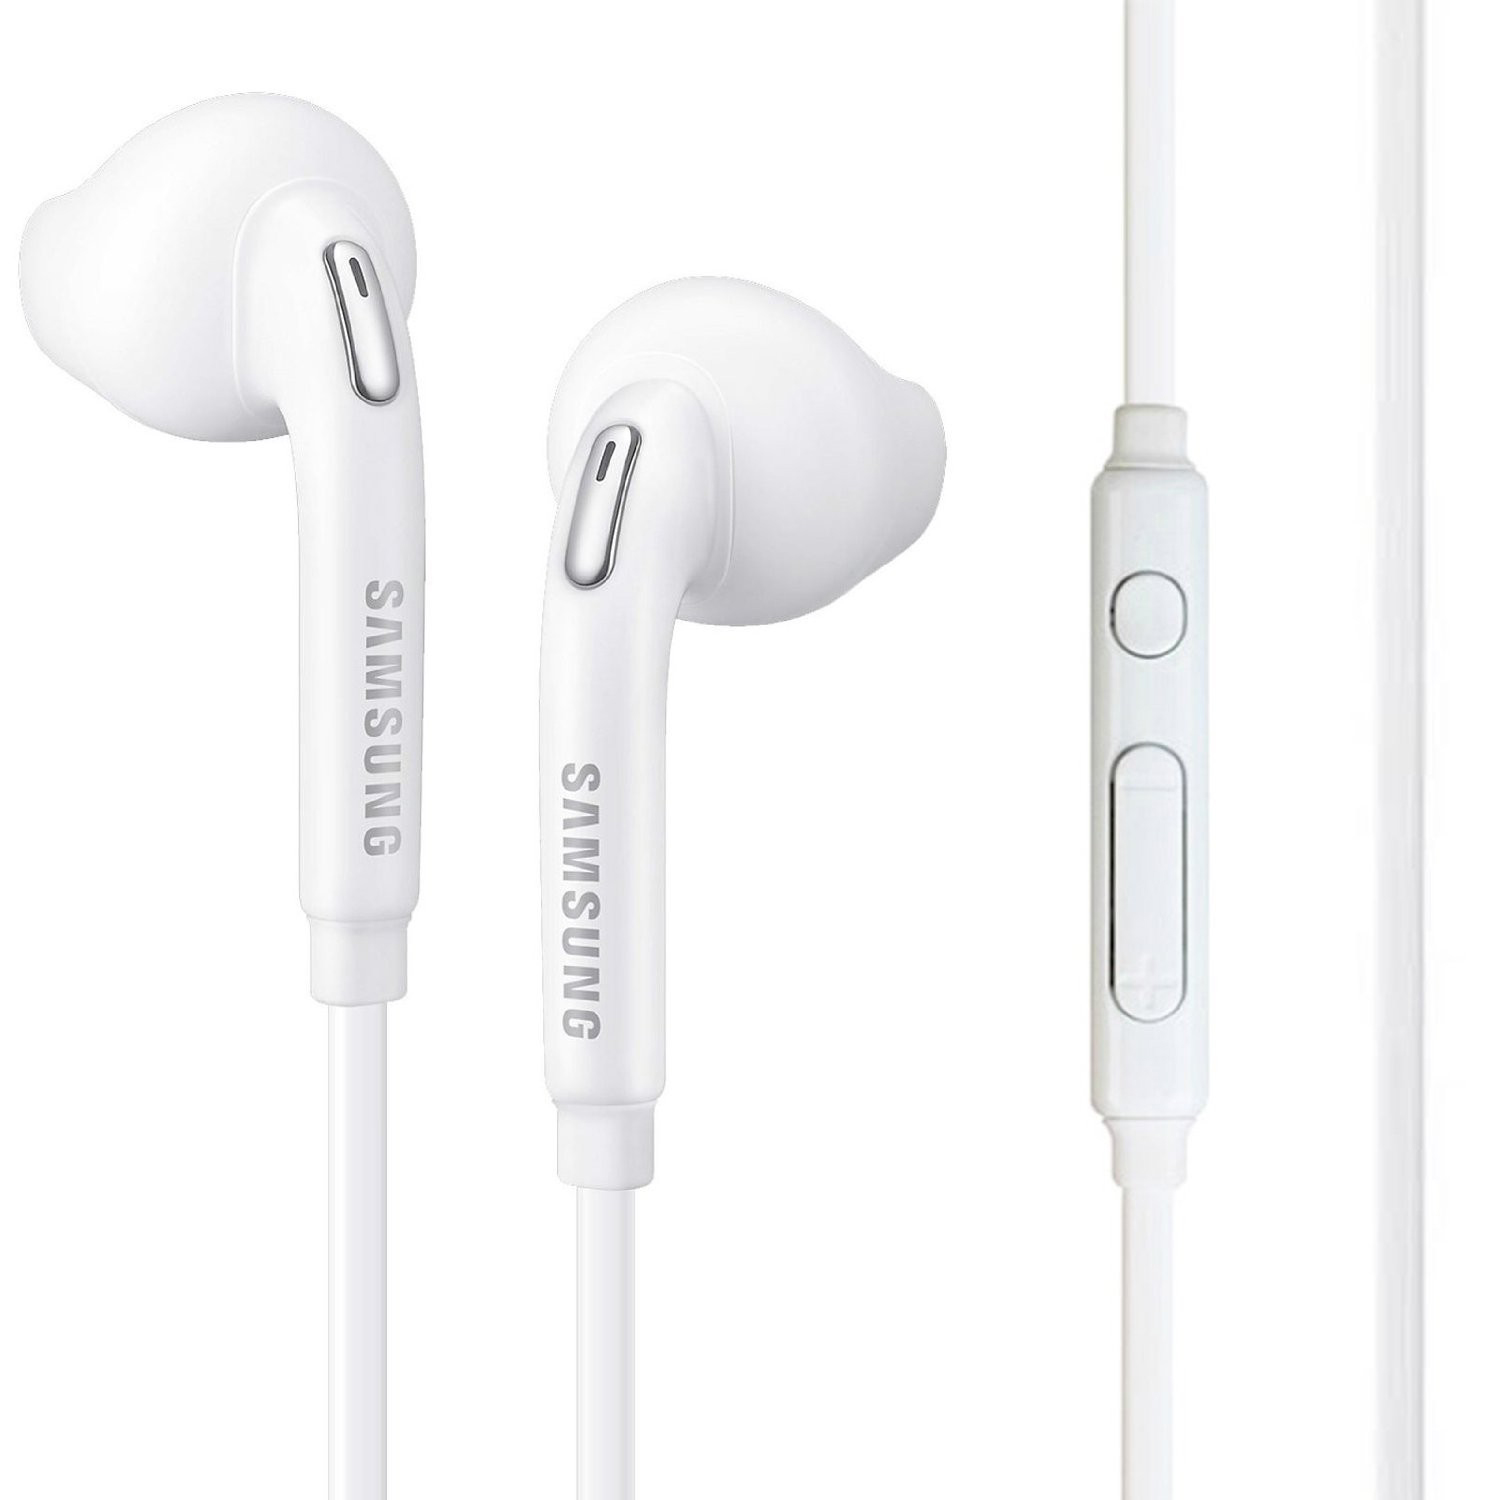 Samsung 3.5mm Earphones/Earbuds/Headphones Stereo Mic&Remote Control Compatible All Samsung Galaxy S6 Edge+/ S6/ Note 8/Note 9/ S8/S8+ S9/S9+ Compatible iPhone 6/6plus/6S/6S Plus/5S/5c [4Pack] - image 2 of 5